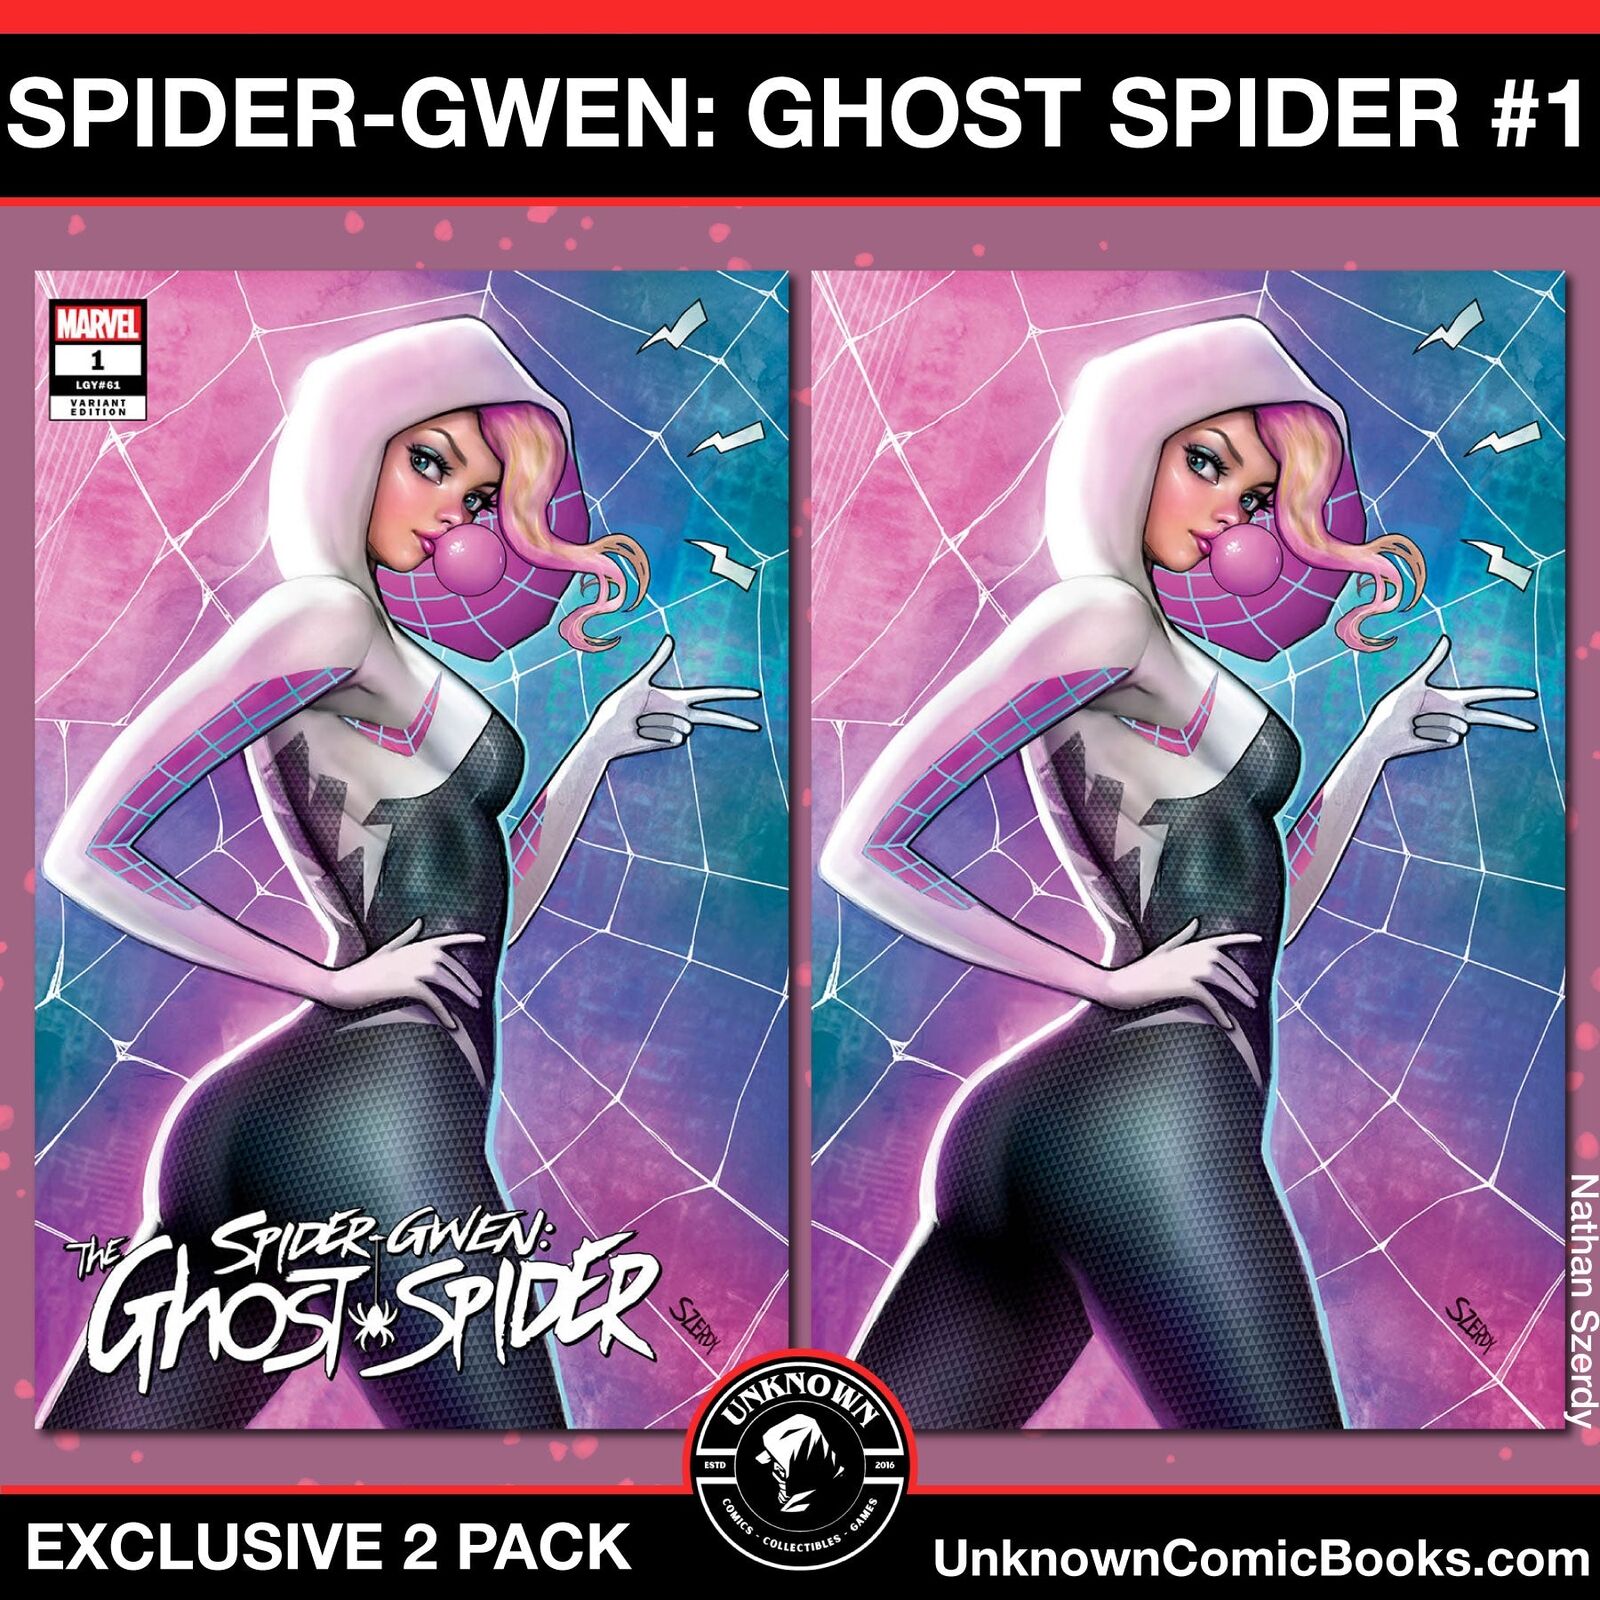 [2 PACK] SPIDER-GWEN: THE GHOST-SPIDER #1 UNKNOWN COMICS NATHAN SZERDY EXCLUSIVE